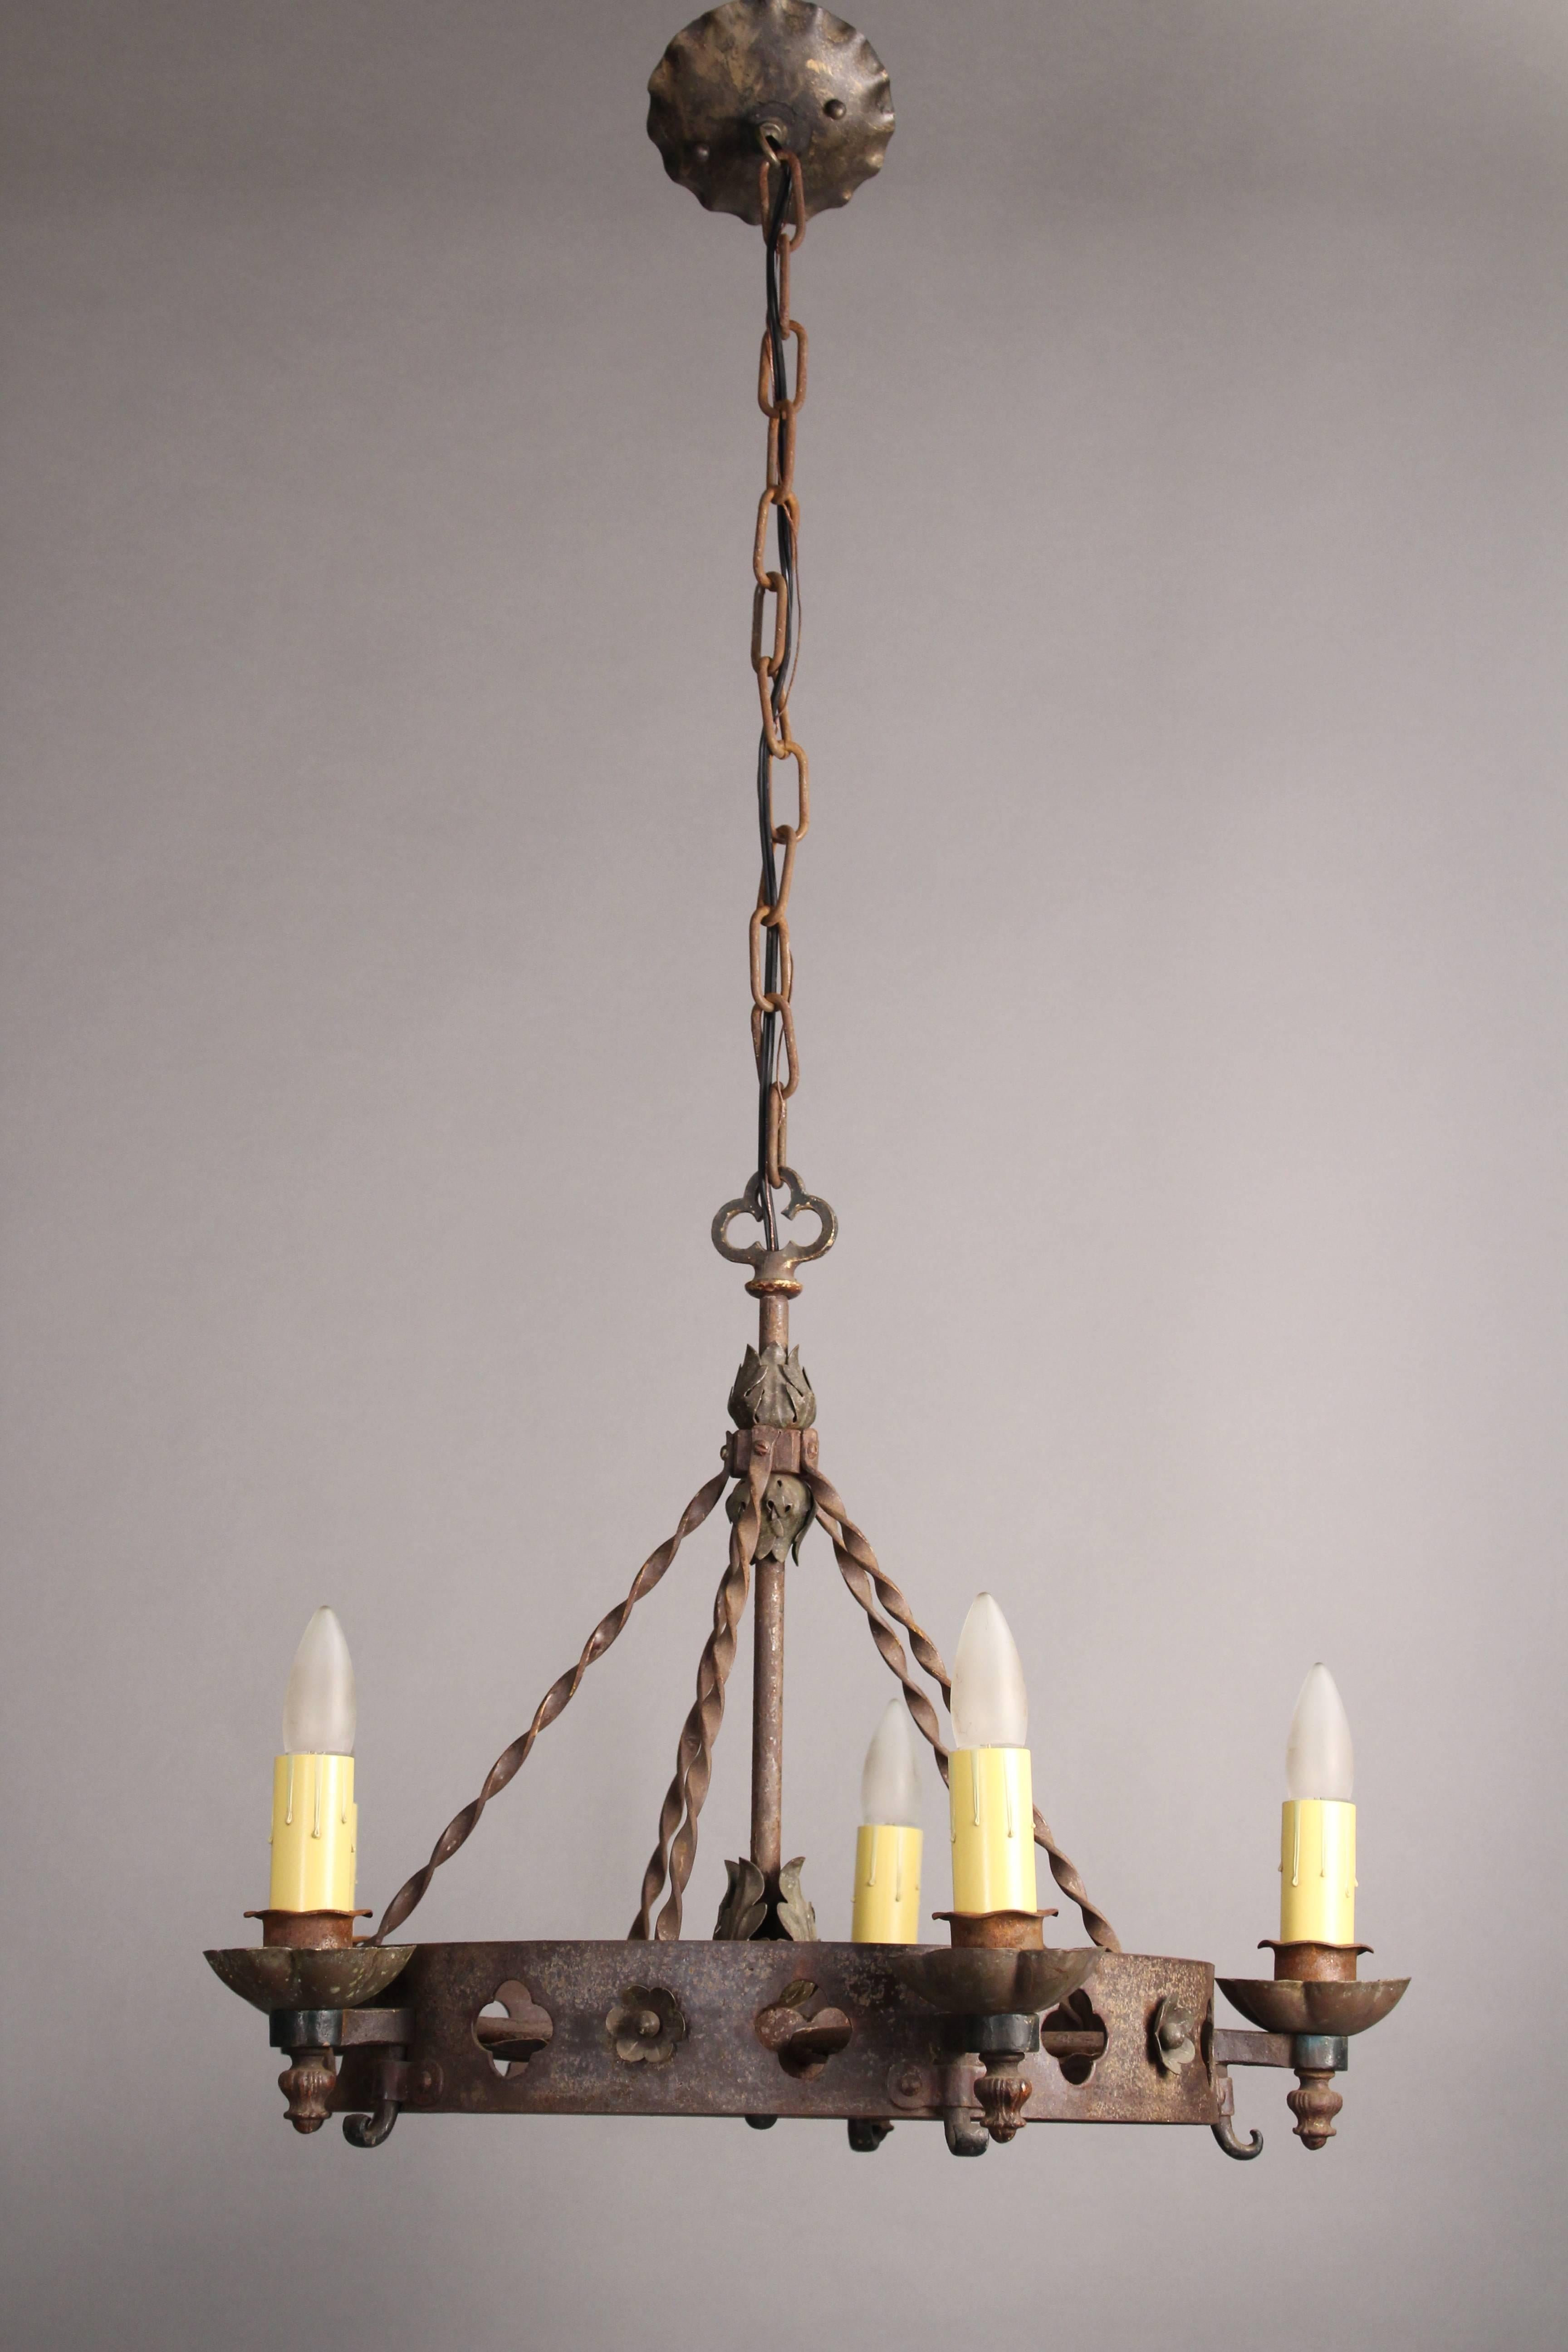 Iron chandelier with clover cut-outs, circa 1920s. Original finish. Measures: 18.25